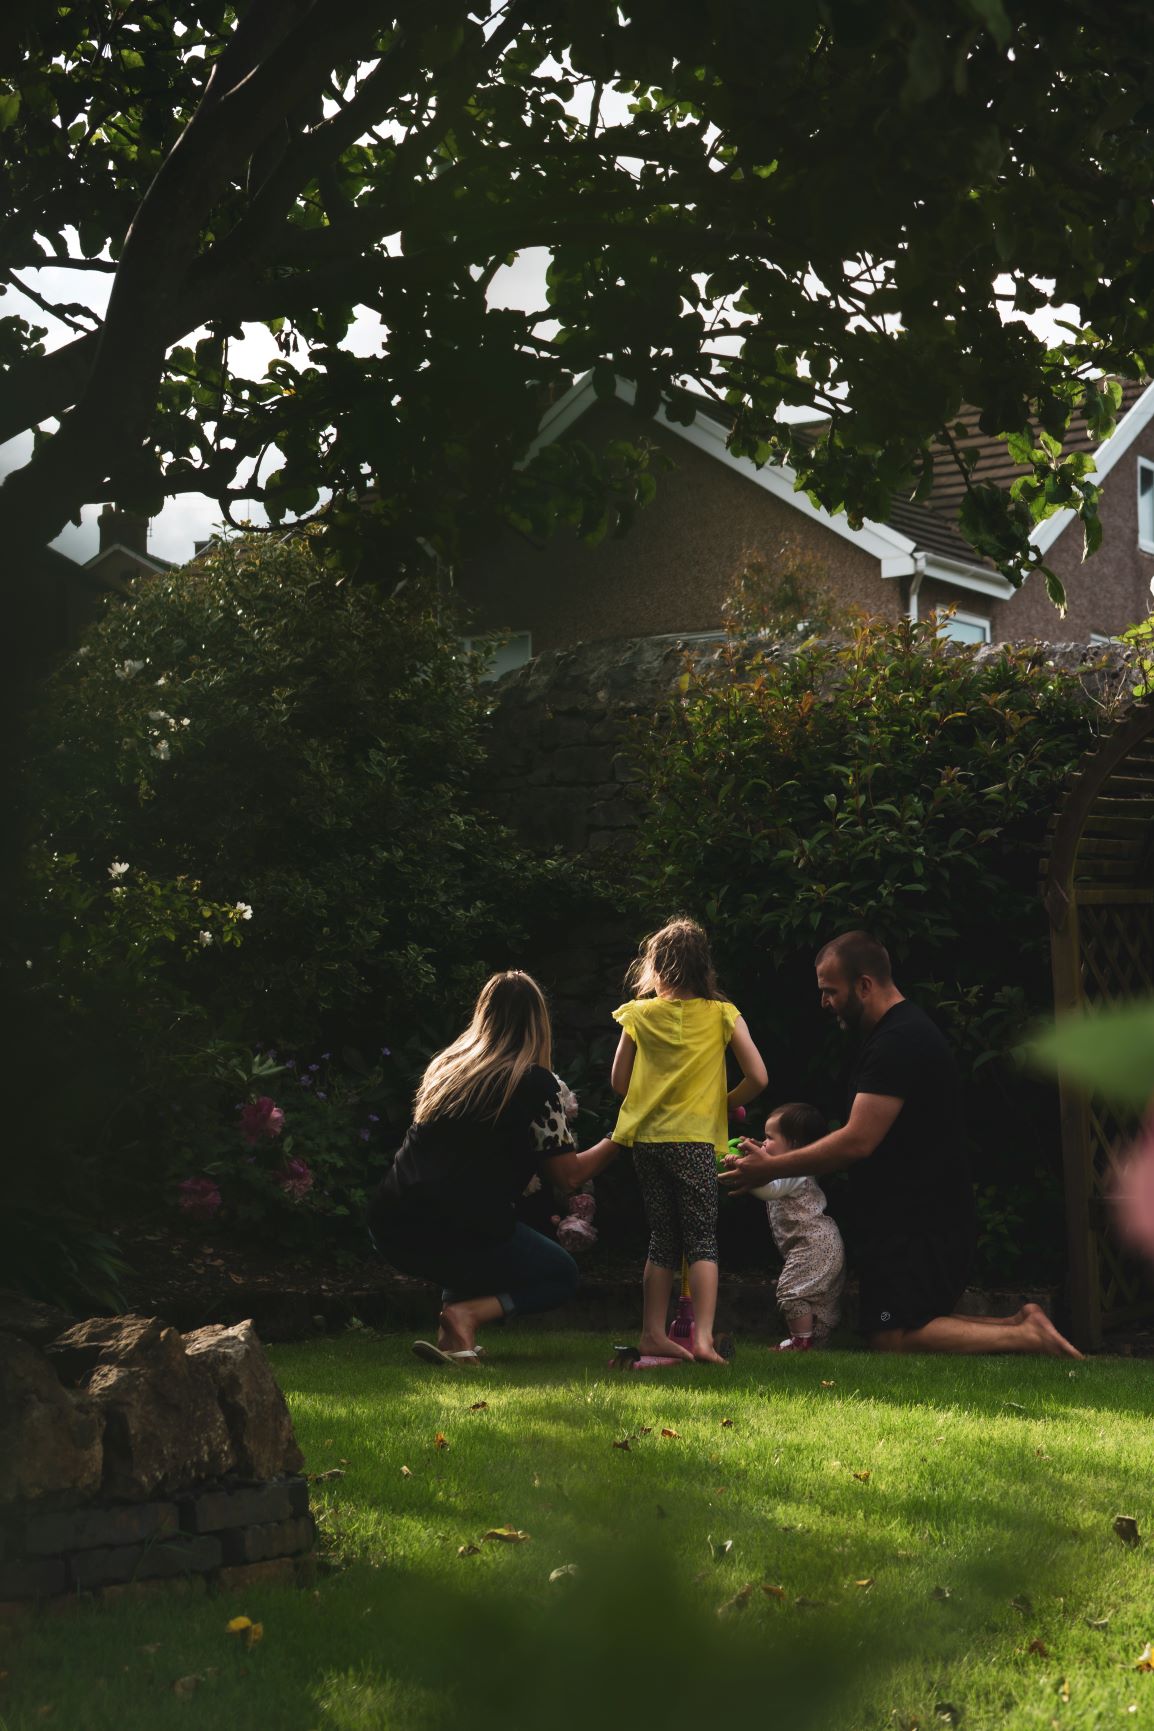 Family of four in garden watering flowers